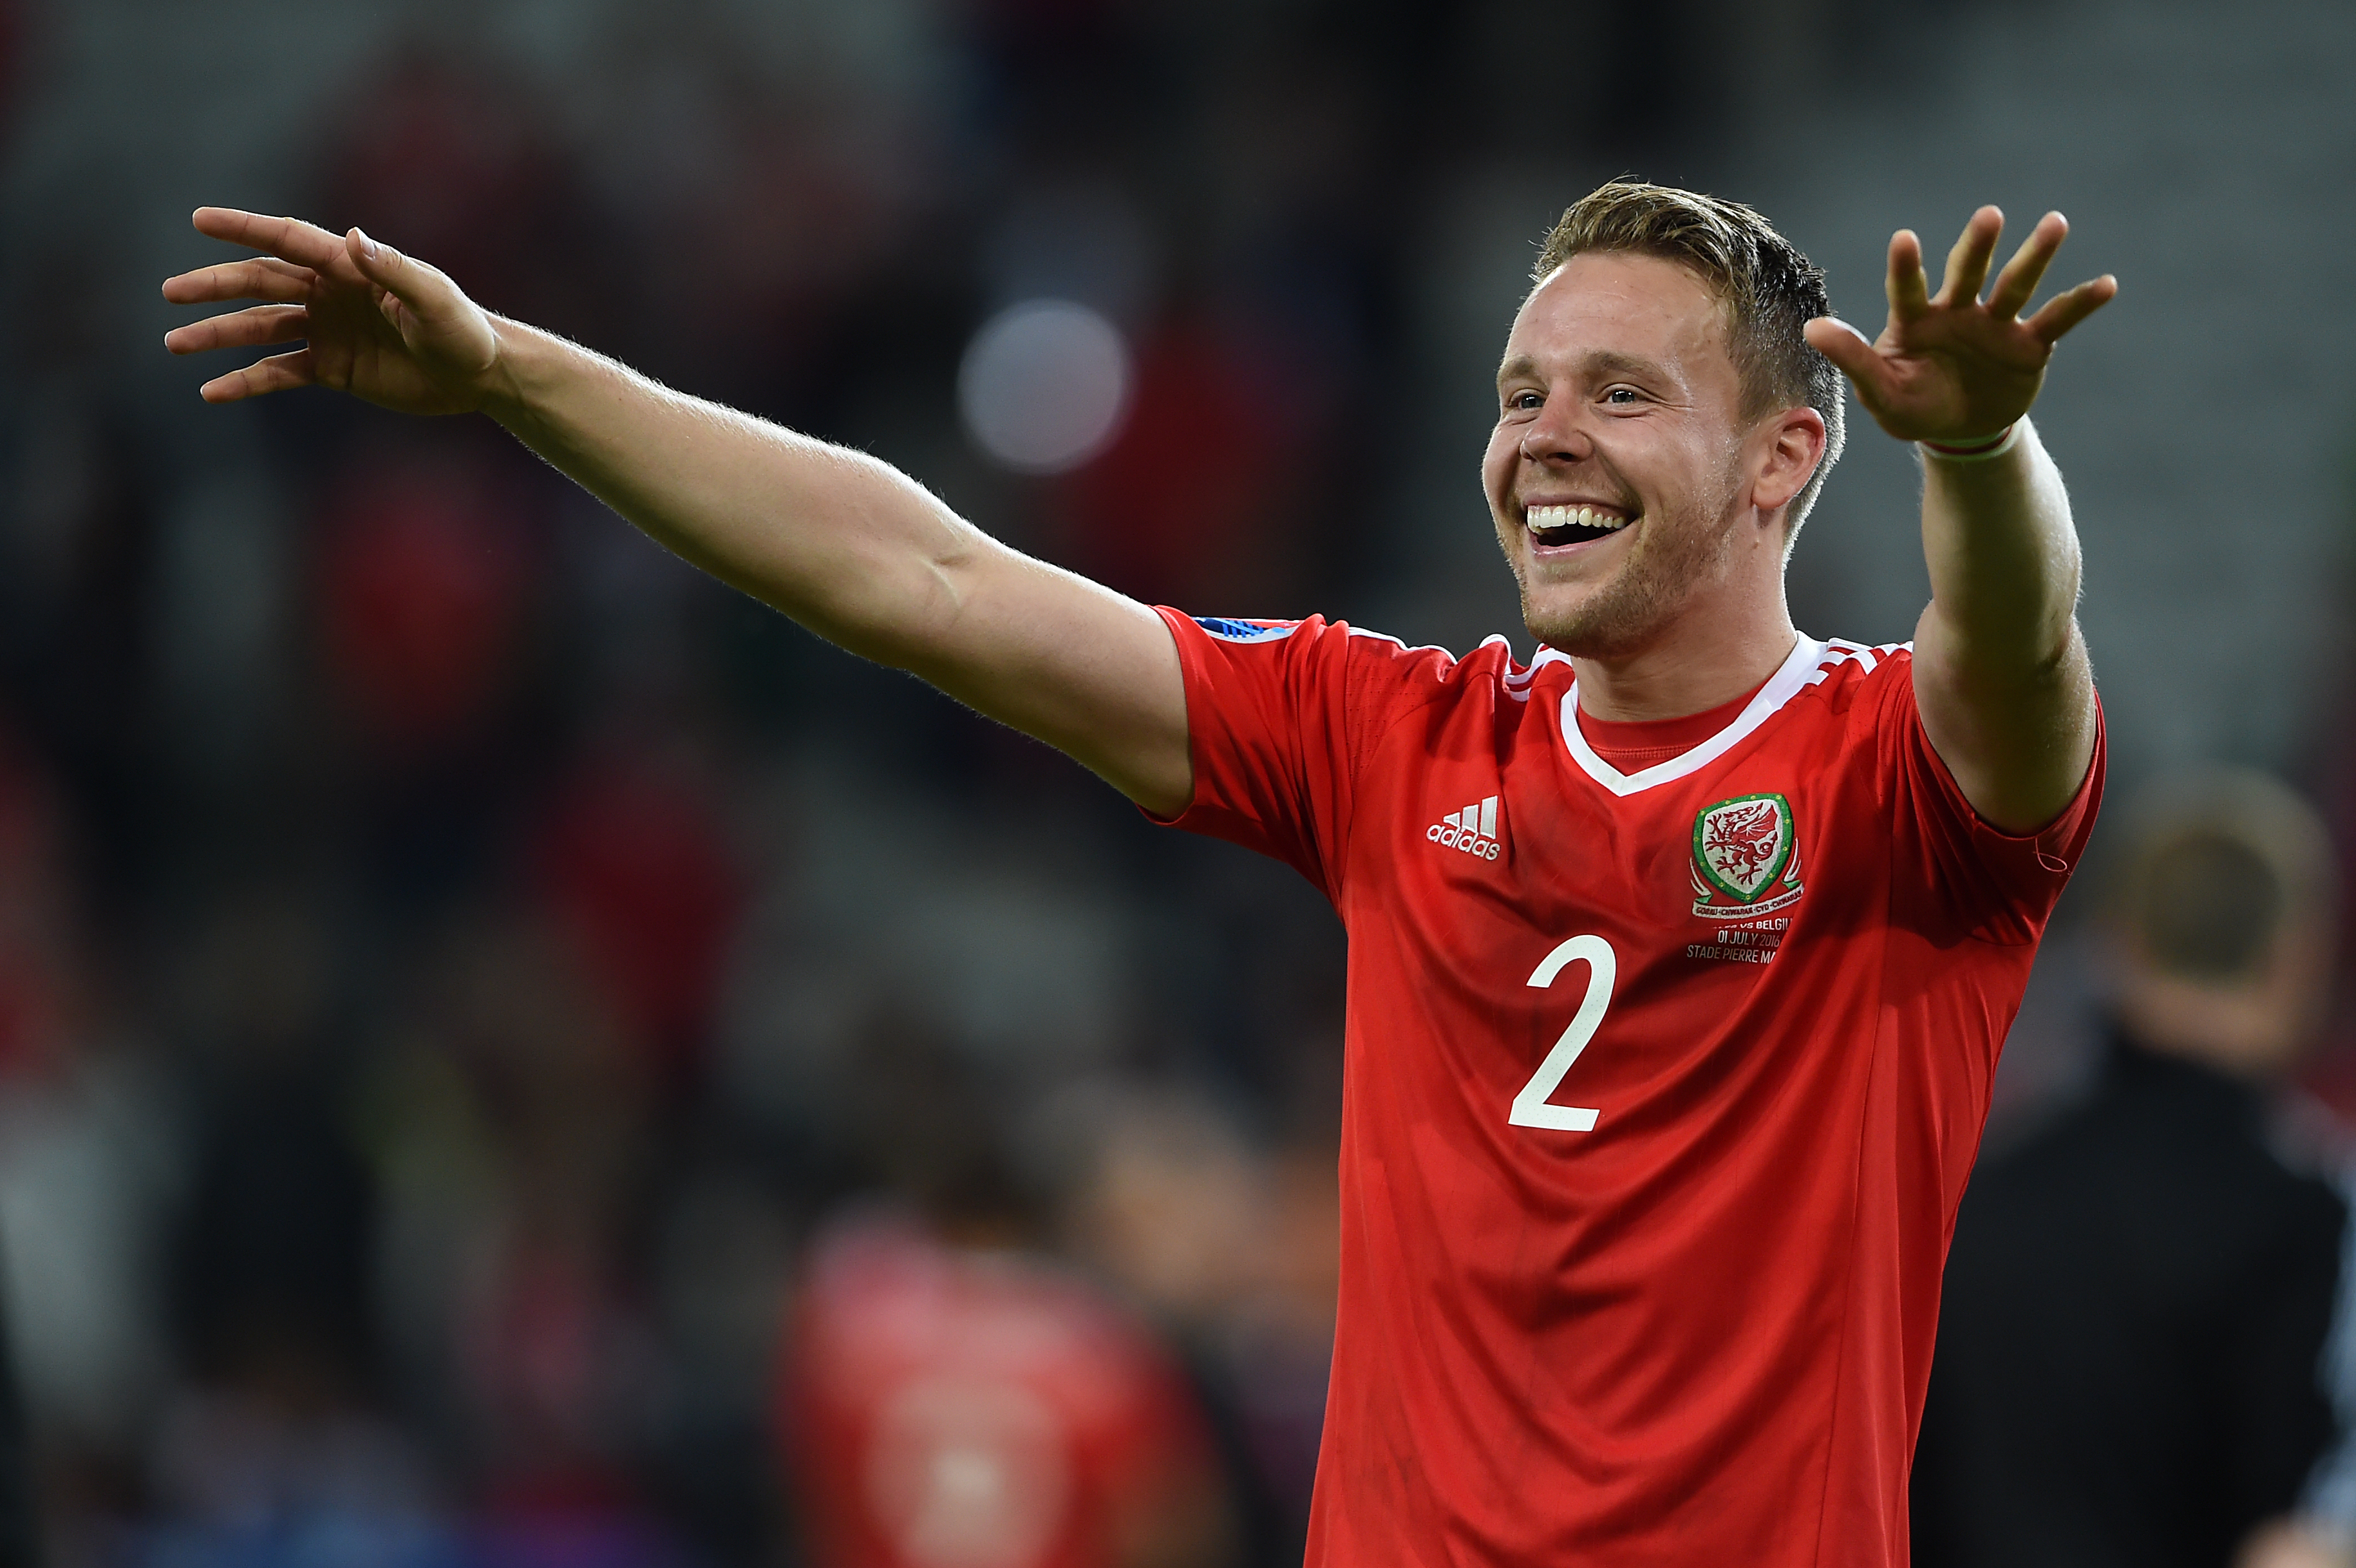 Proud' Chris Gunter did not expect to win 100 caps for Wales | FourFourTwo